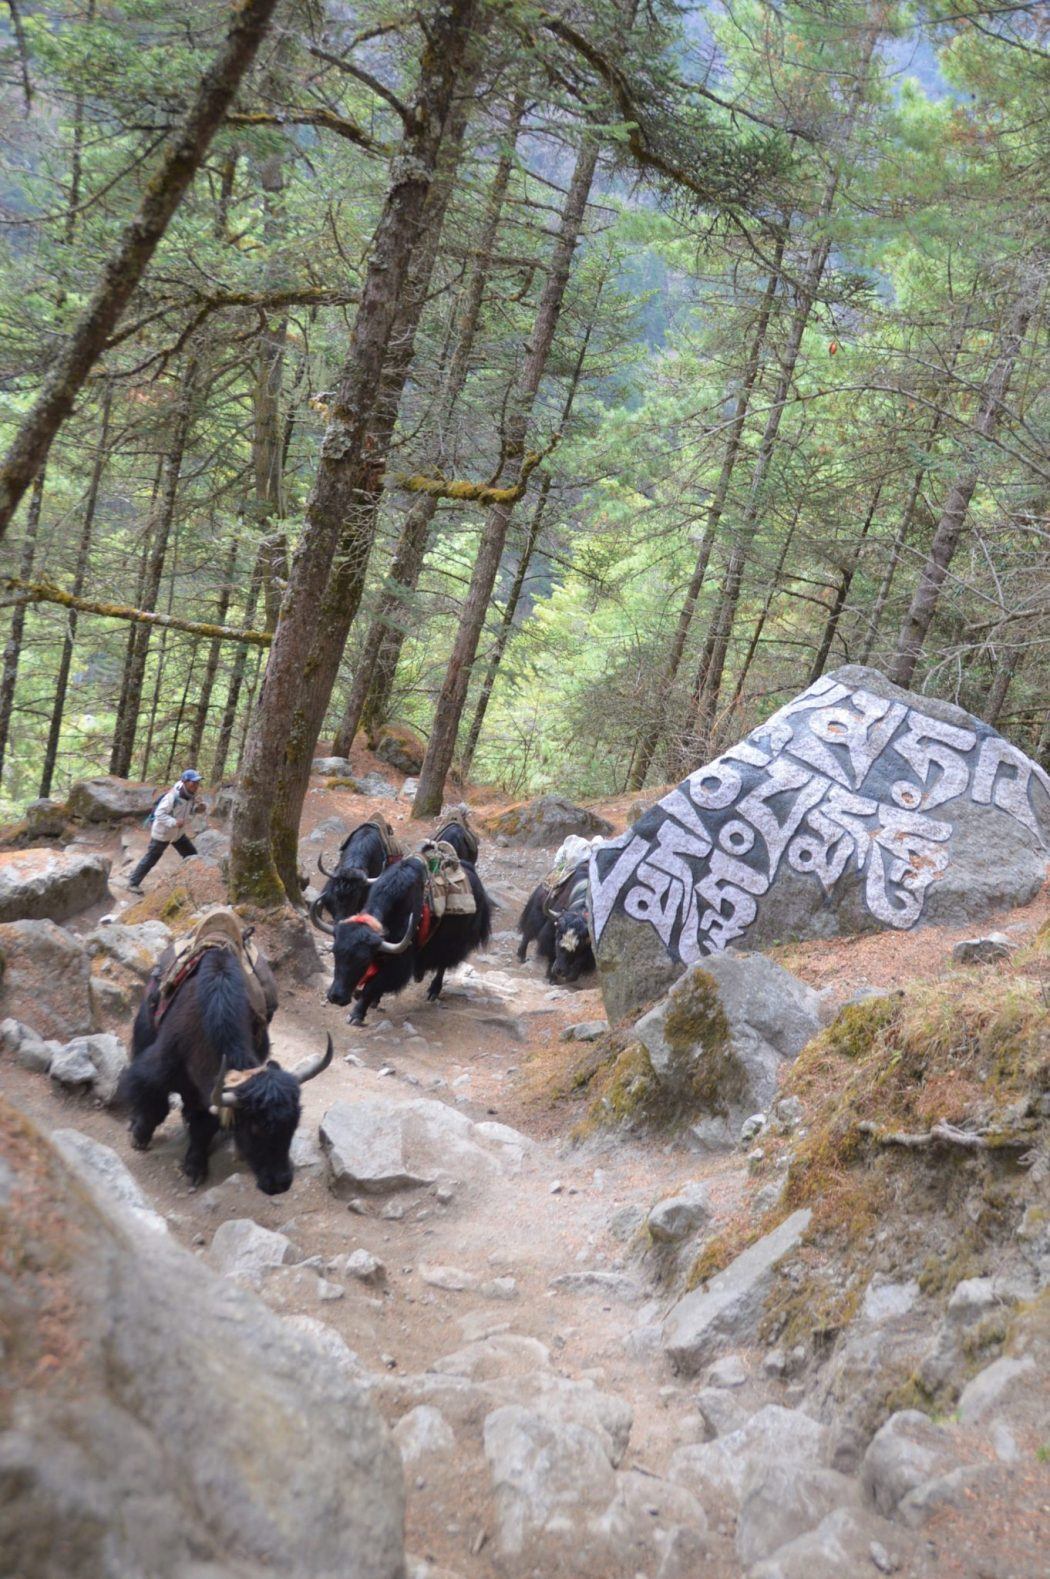 yaks trekking past trees and rock with nepalese writing